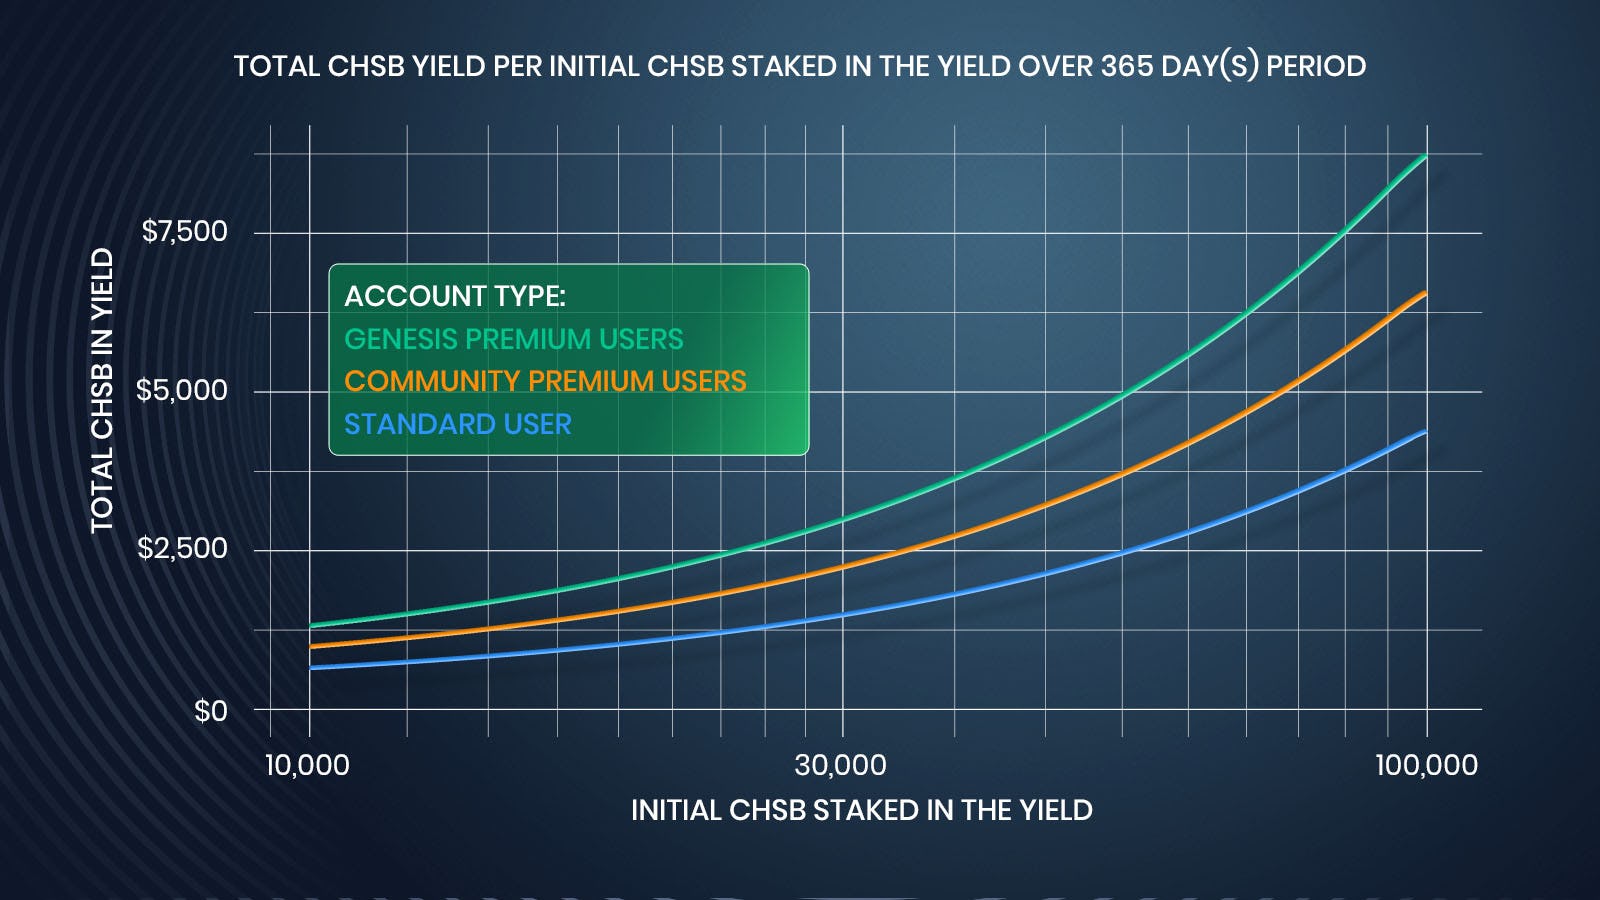 CHSB staked in the Yield over 365 day(s) period.